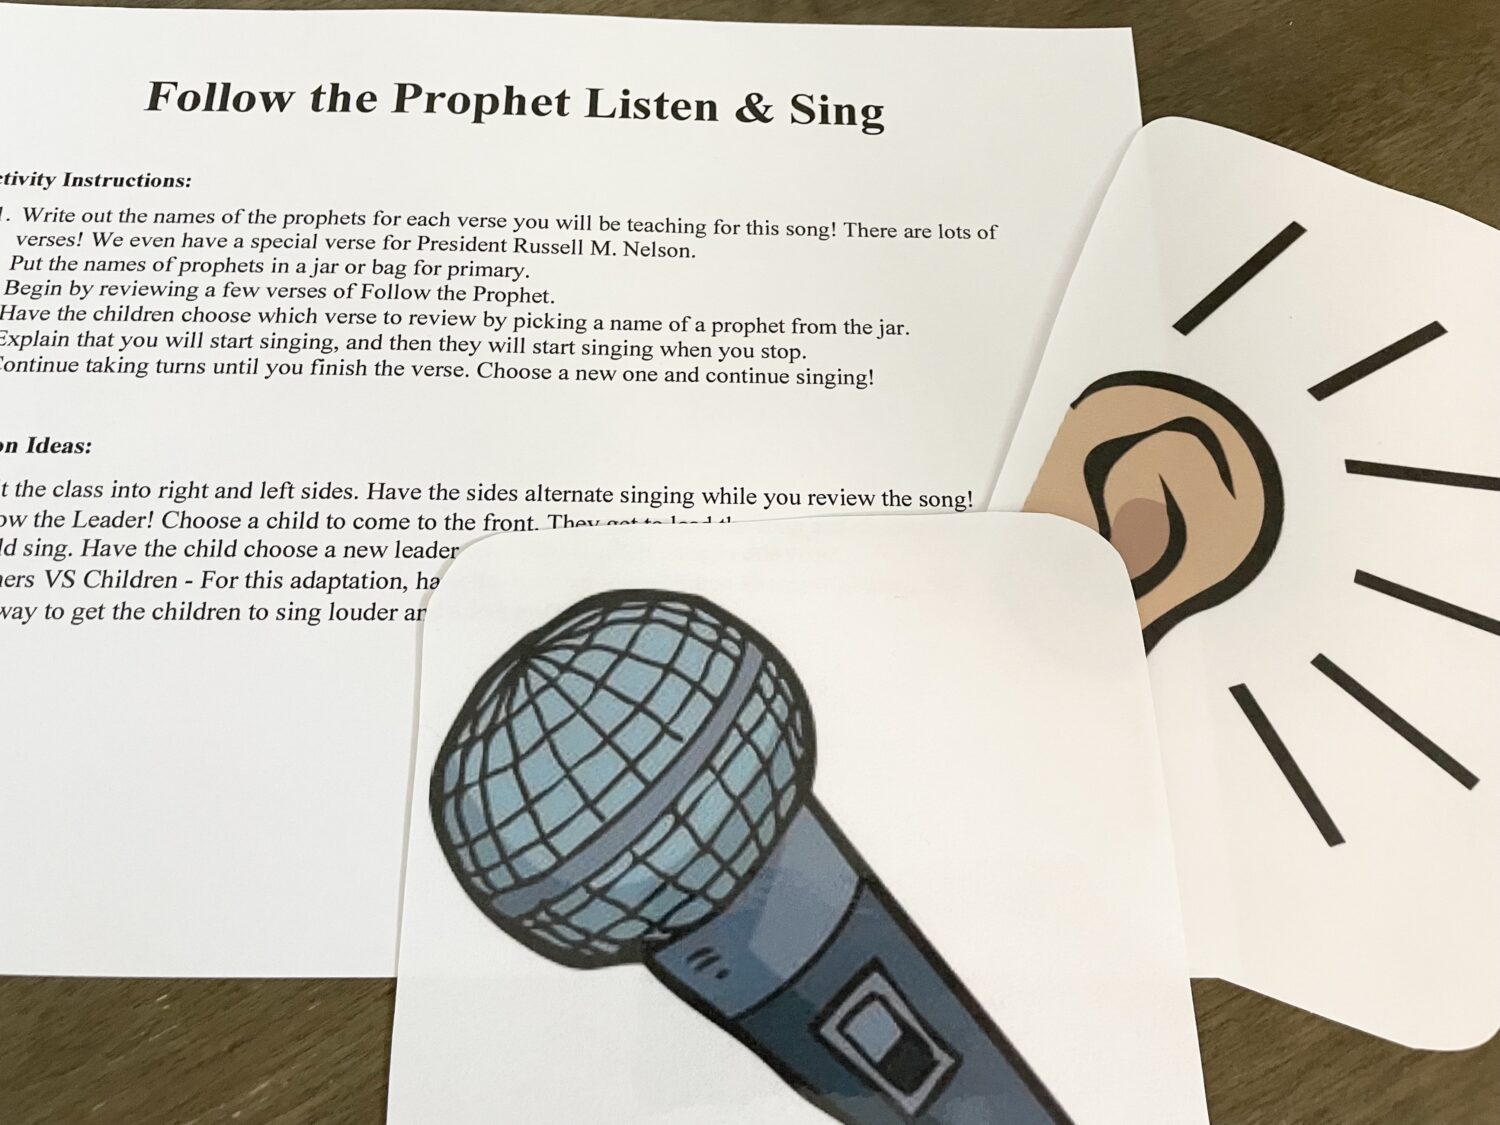 Follow the Prophet Listen and Sing singing time ideas with printable song helps for LDS Primary music leaders